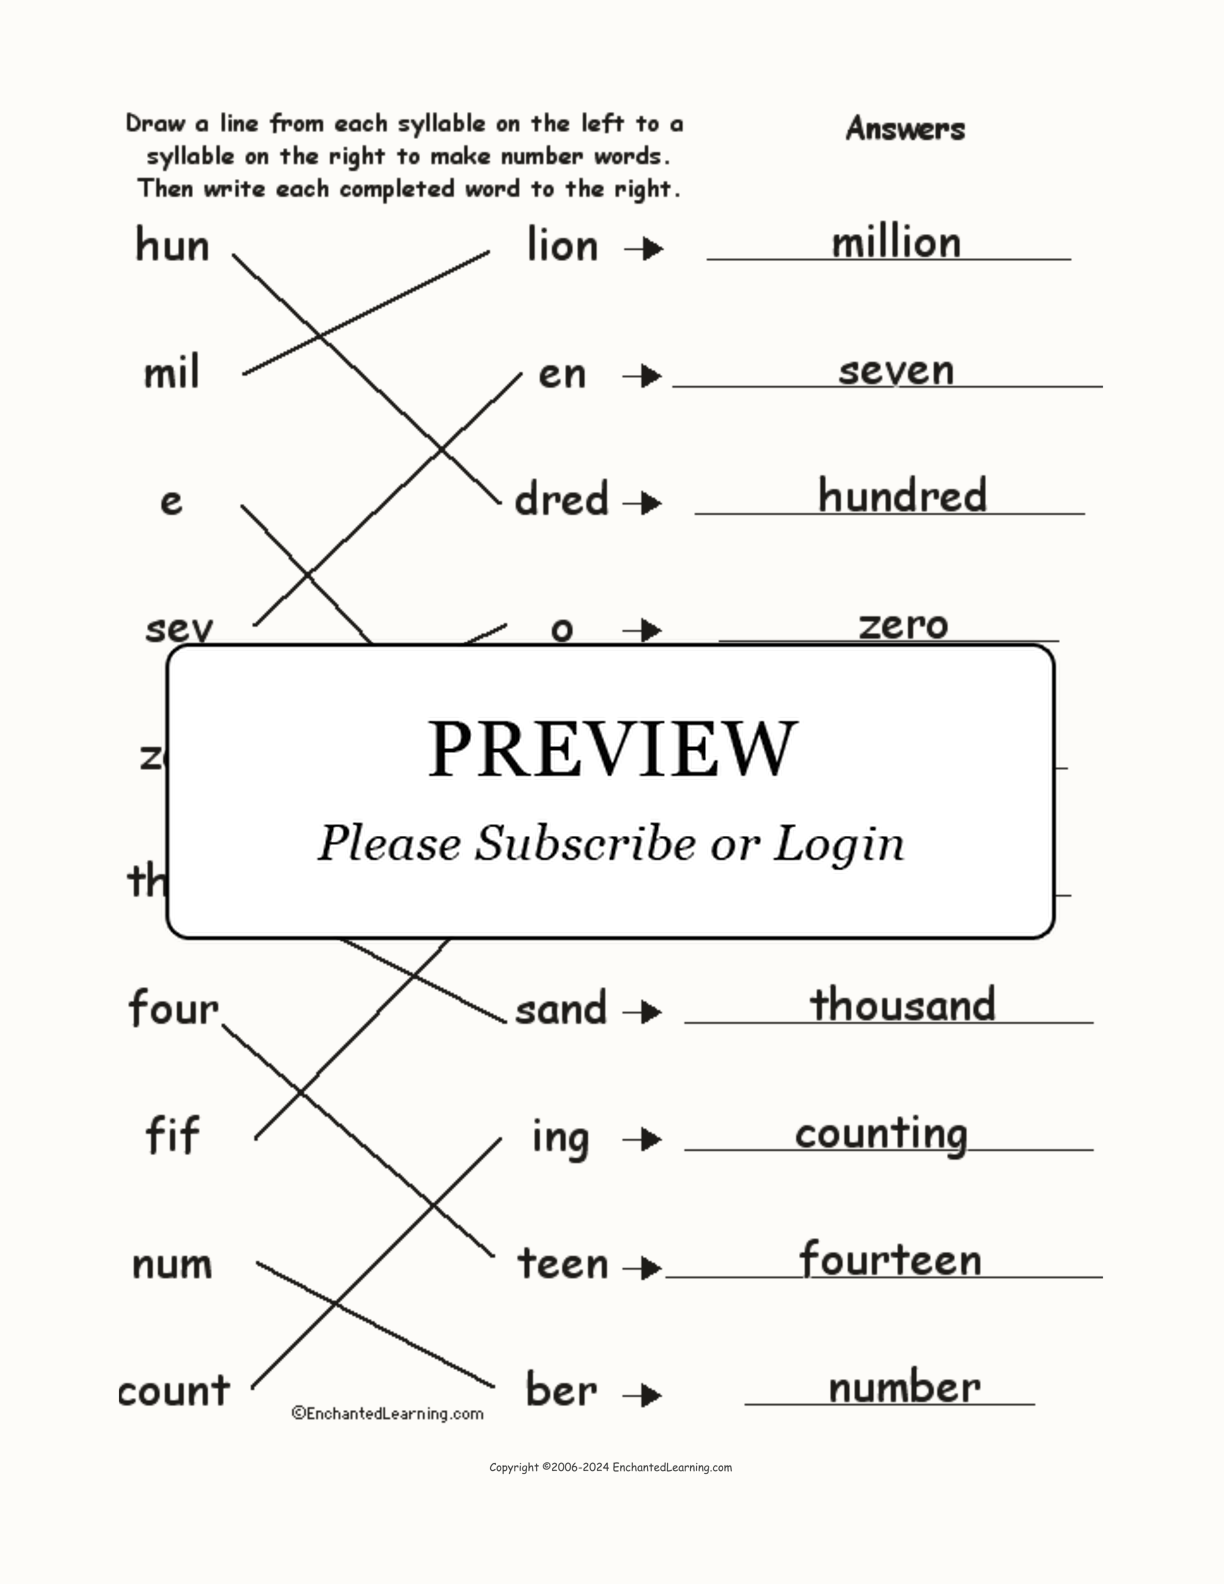 Match the Syllables: Number Words interactive worksheet page 2